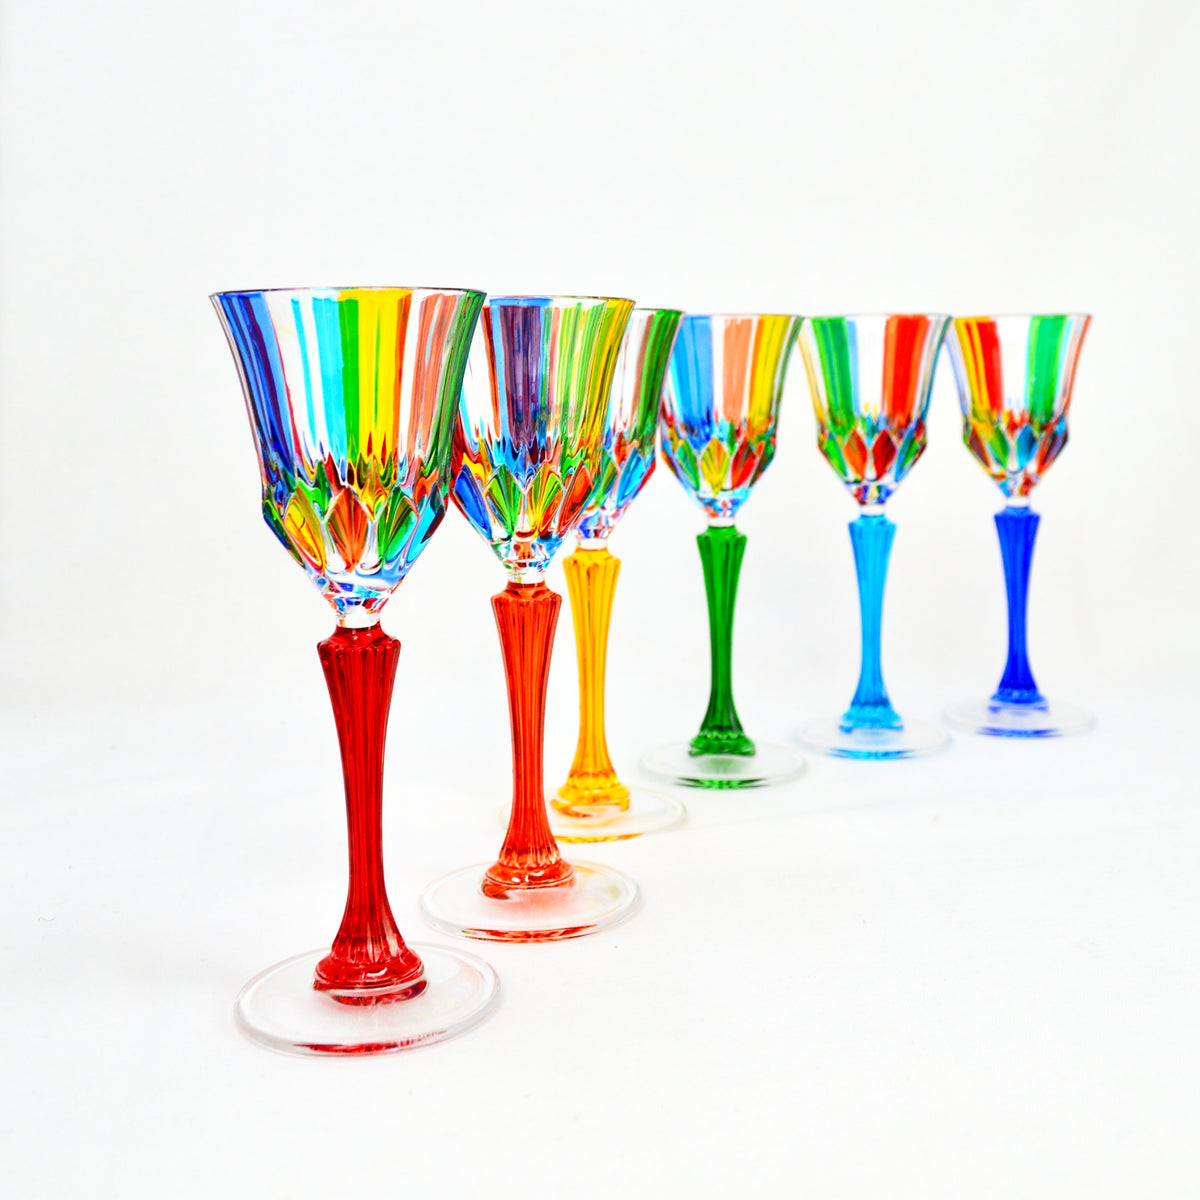 Swatch Cordial Glasses, Hand-Painted Italian Crystal, Set of 6 - My Italian Decor